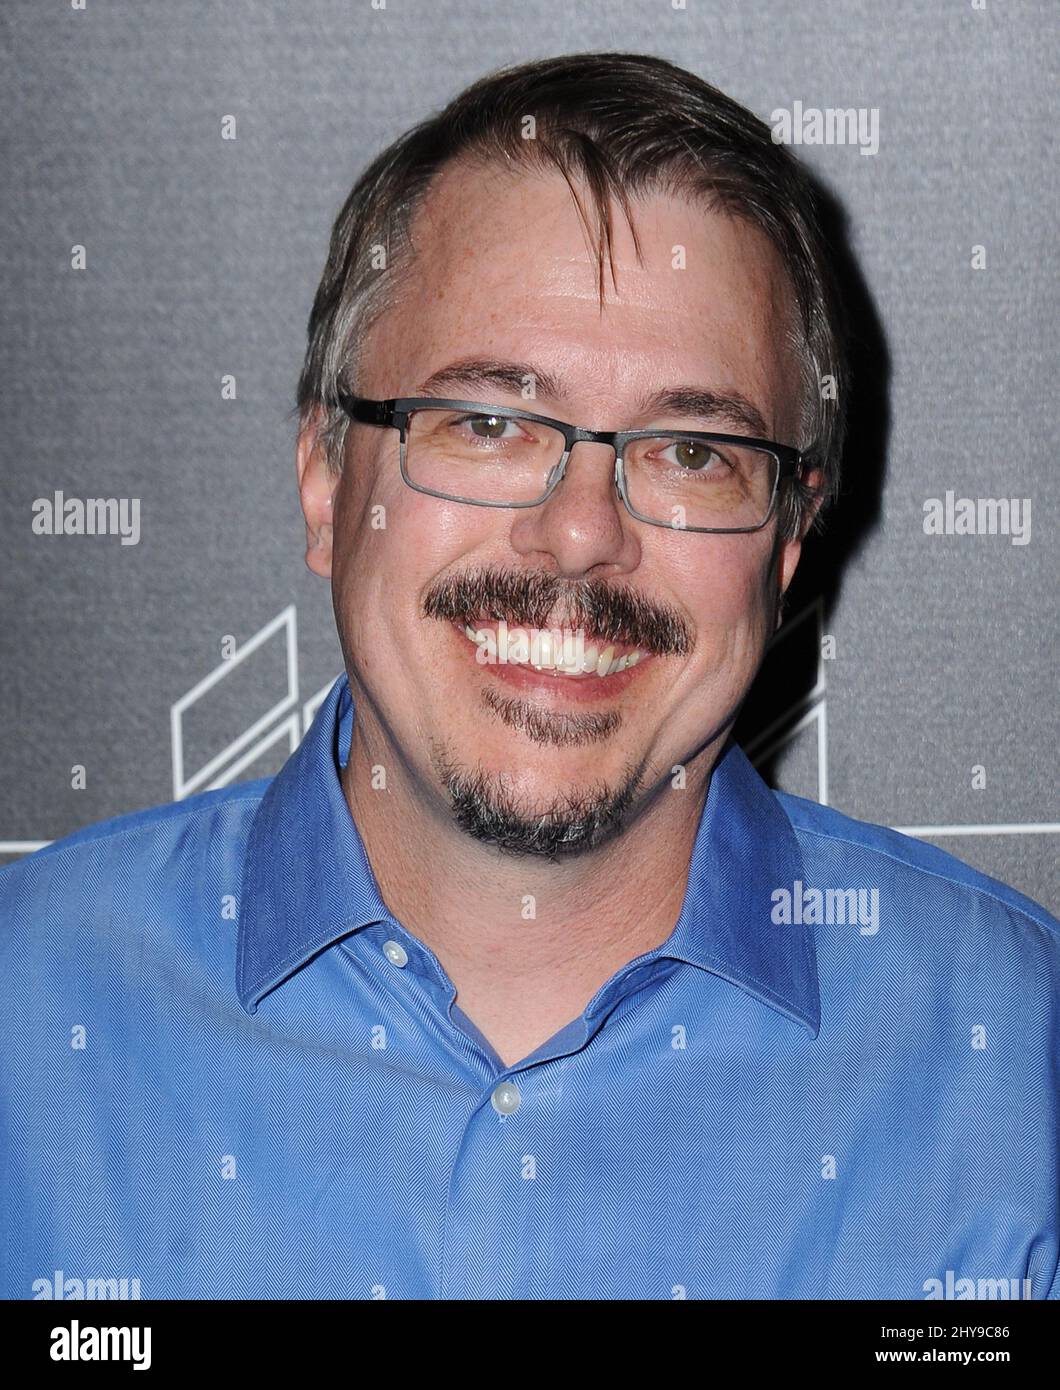 Vince Gilligan attending the premiere of 'The Night Manager' in Los Angeles Stock Photo